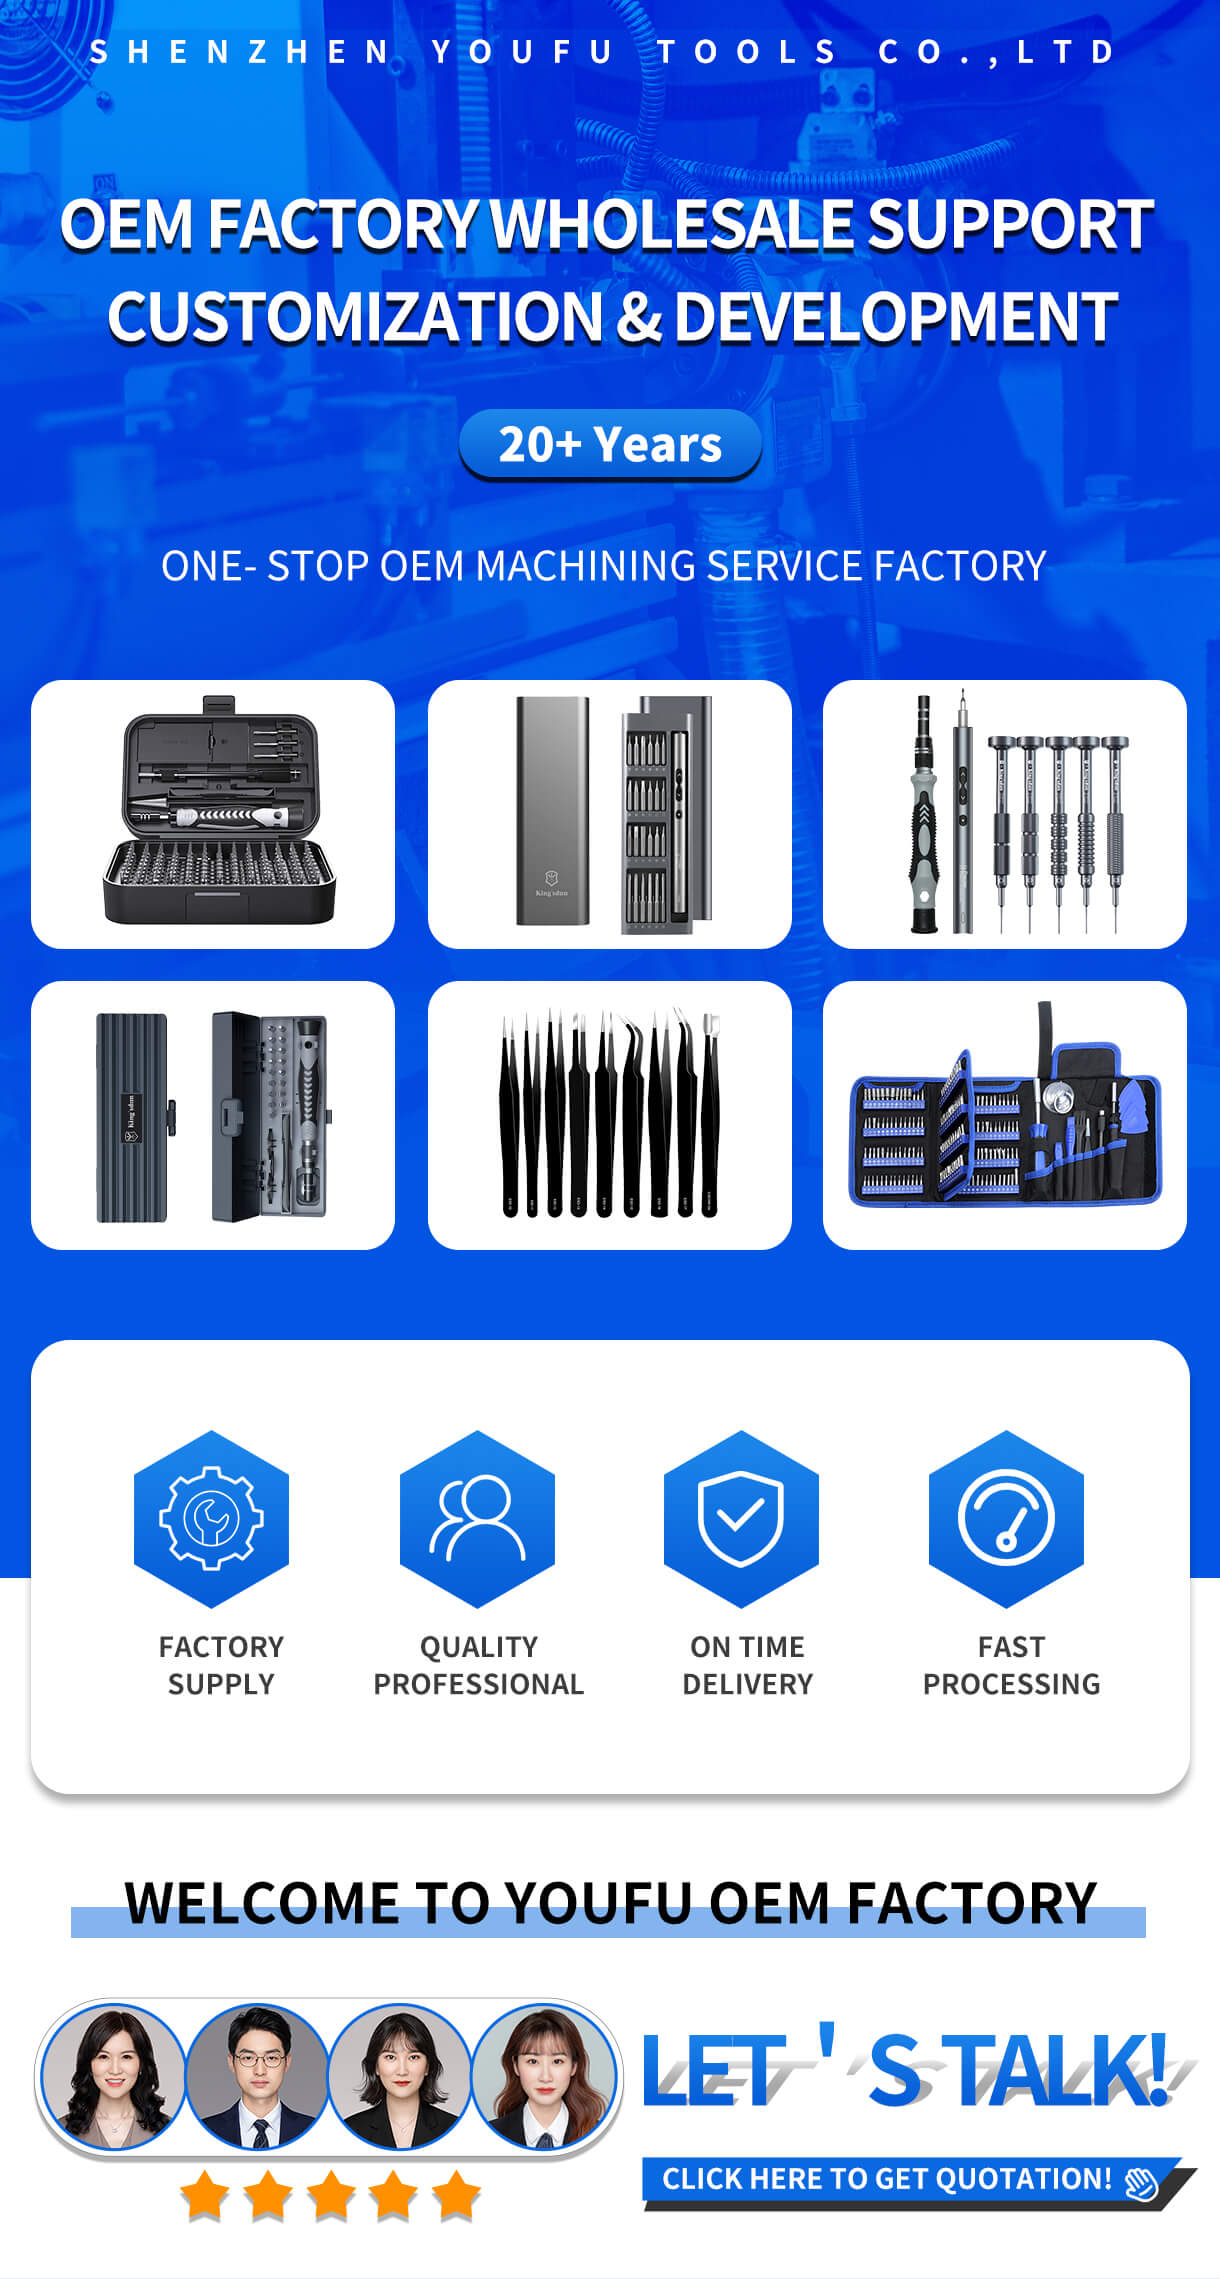 30 in 1 Long arm wrenches provide extra reach and greater torqueContains For Small mechanical.electronics and small things.This kit is used for iPad iPhone Smartphones, Tablets, Laptops, PC, Watches, Glasses, Camera.for PS4/ Xbox controller and Other Electronic Devices.